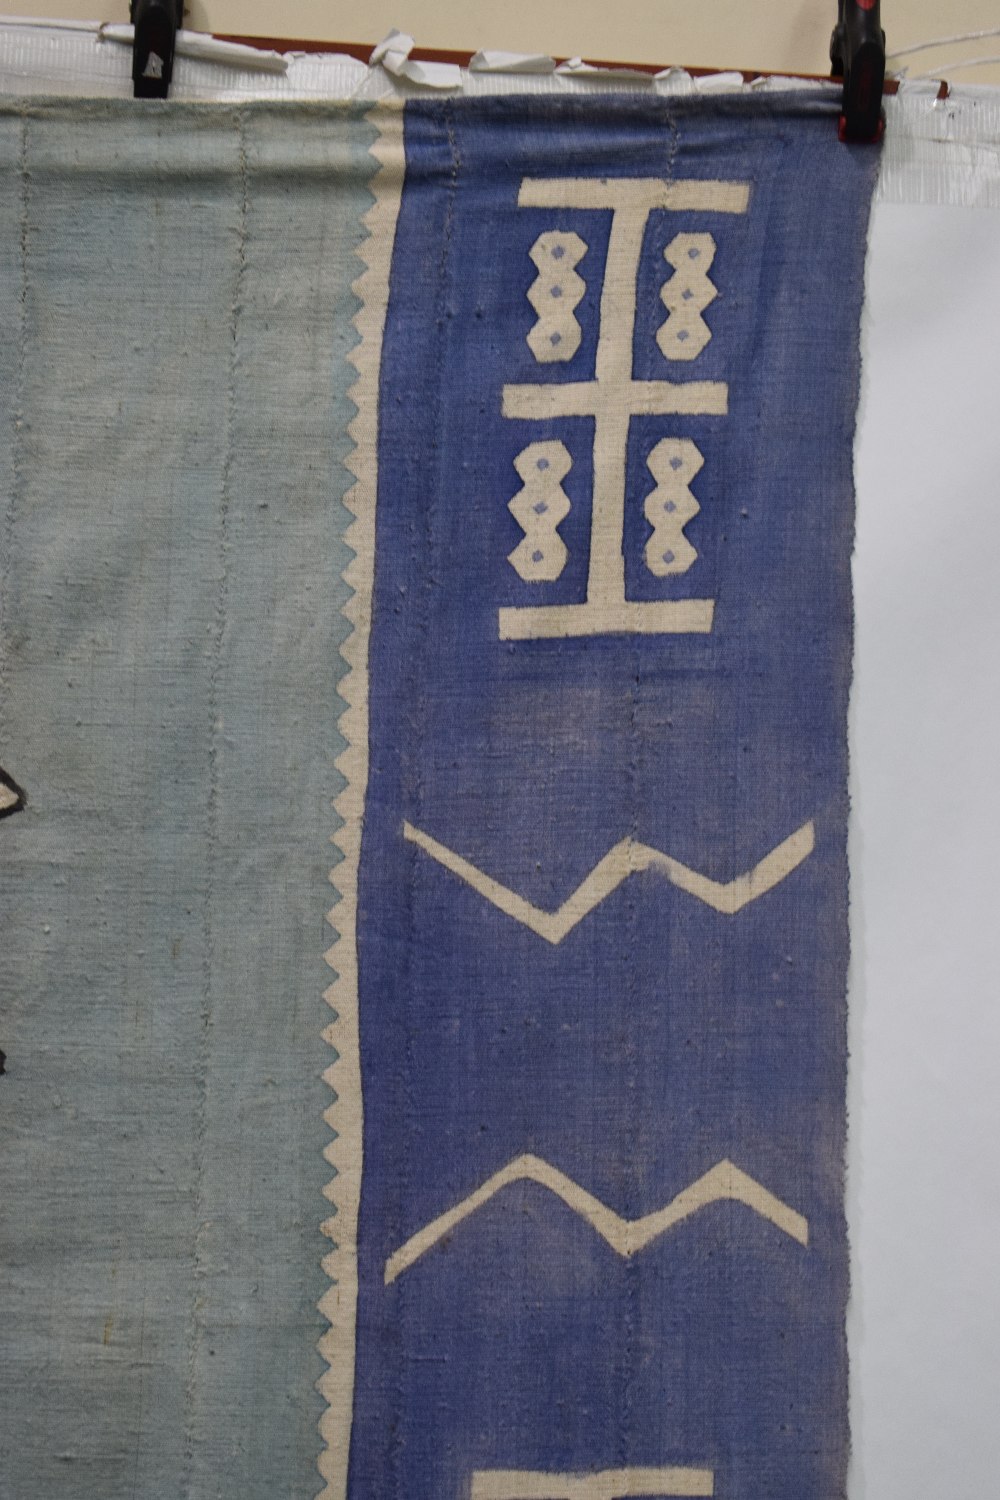 Three African 'Mud' or Bogolan cloths, Mali, west Africa, 20th century, the cotton strips dyed in - Image 3 of 27